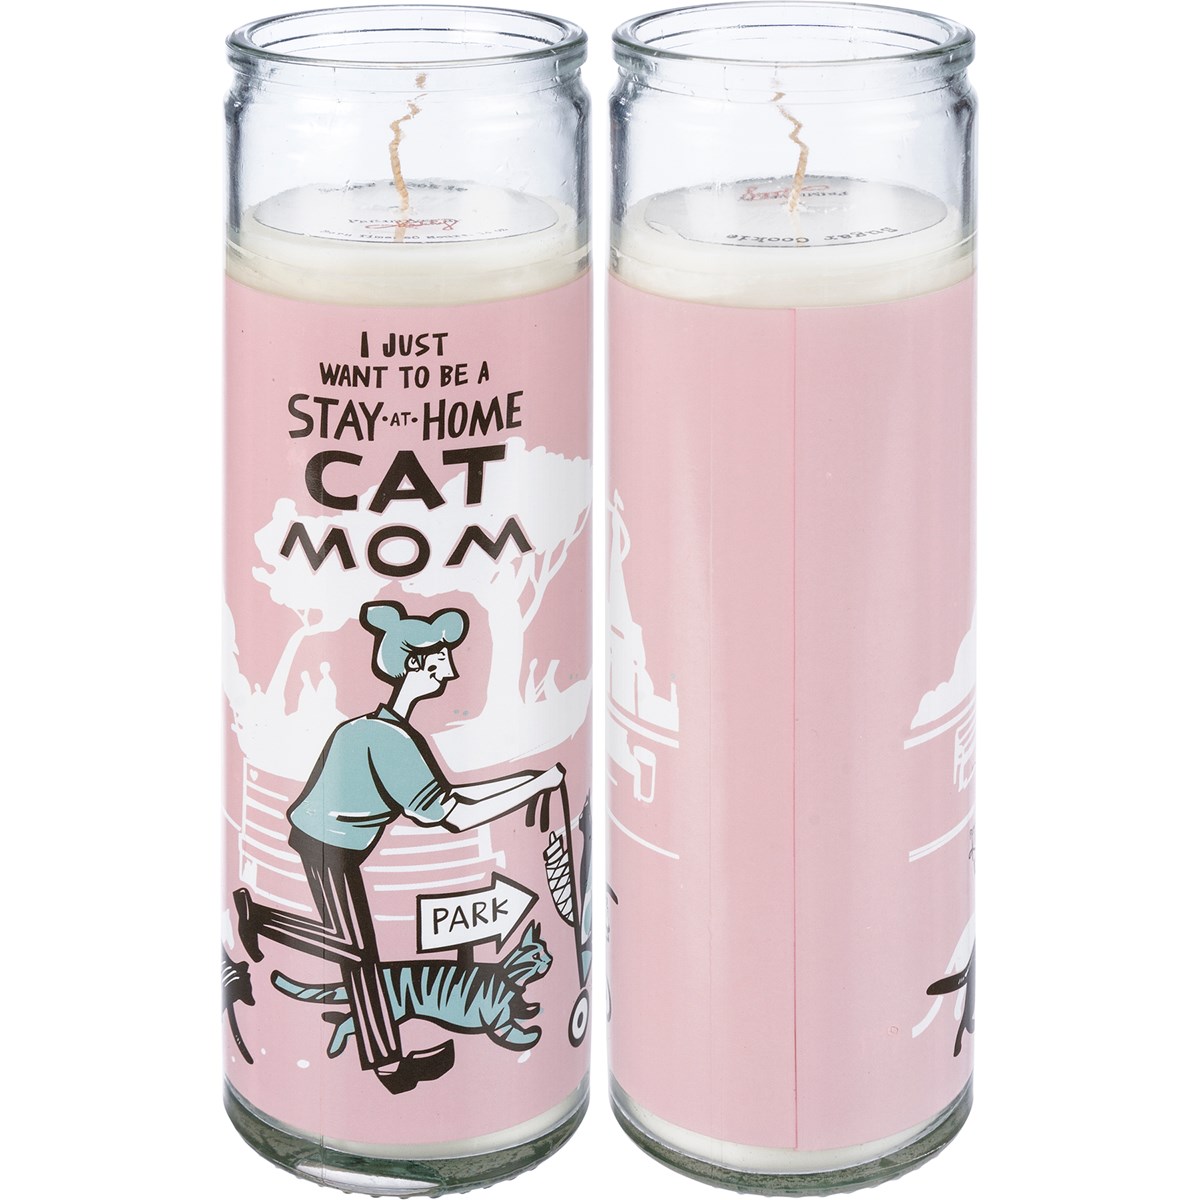 I Want To Be A Stay At Home Cat Mom Jar Candle - Soy Wax, Glass, Cotton